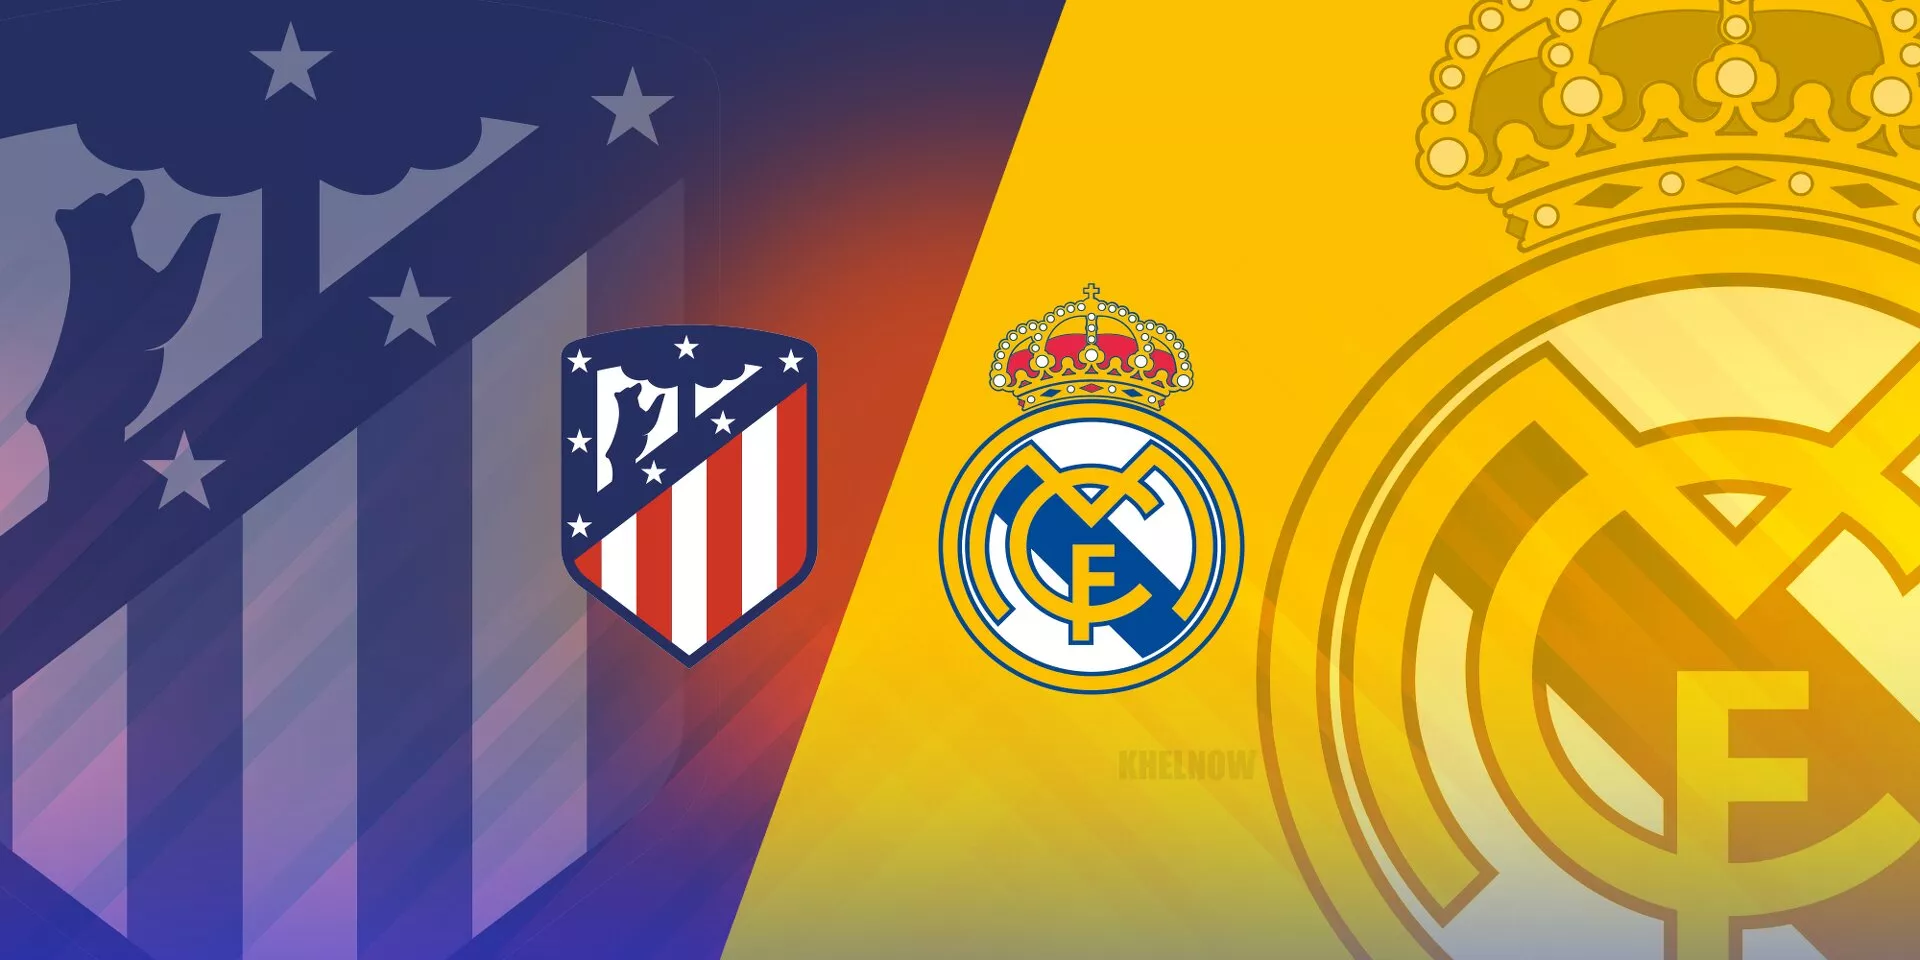 Atletico Madrid vs Real Madrid: Where and how to watch?